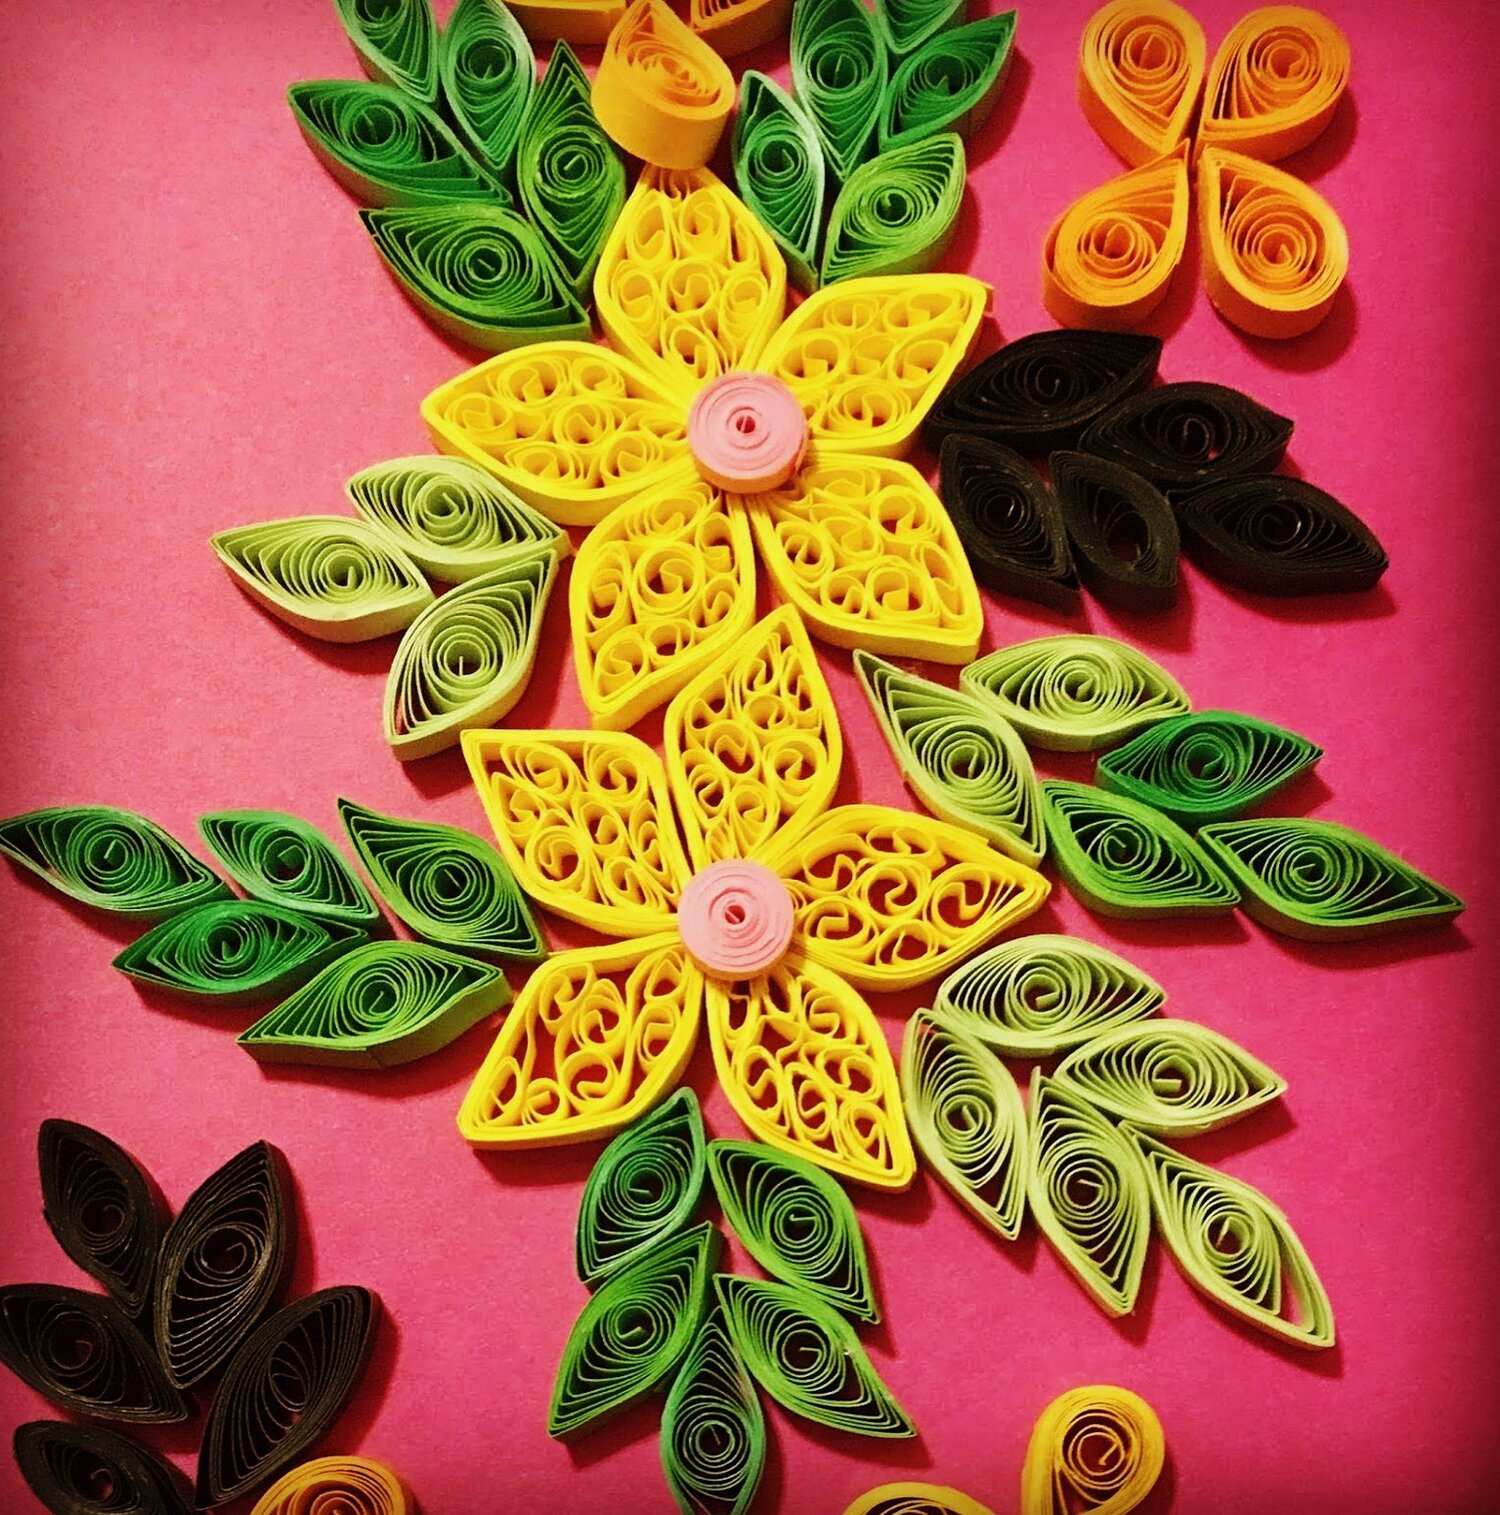 One of my favorite paper quilling projects I made last year. : r/crafts